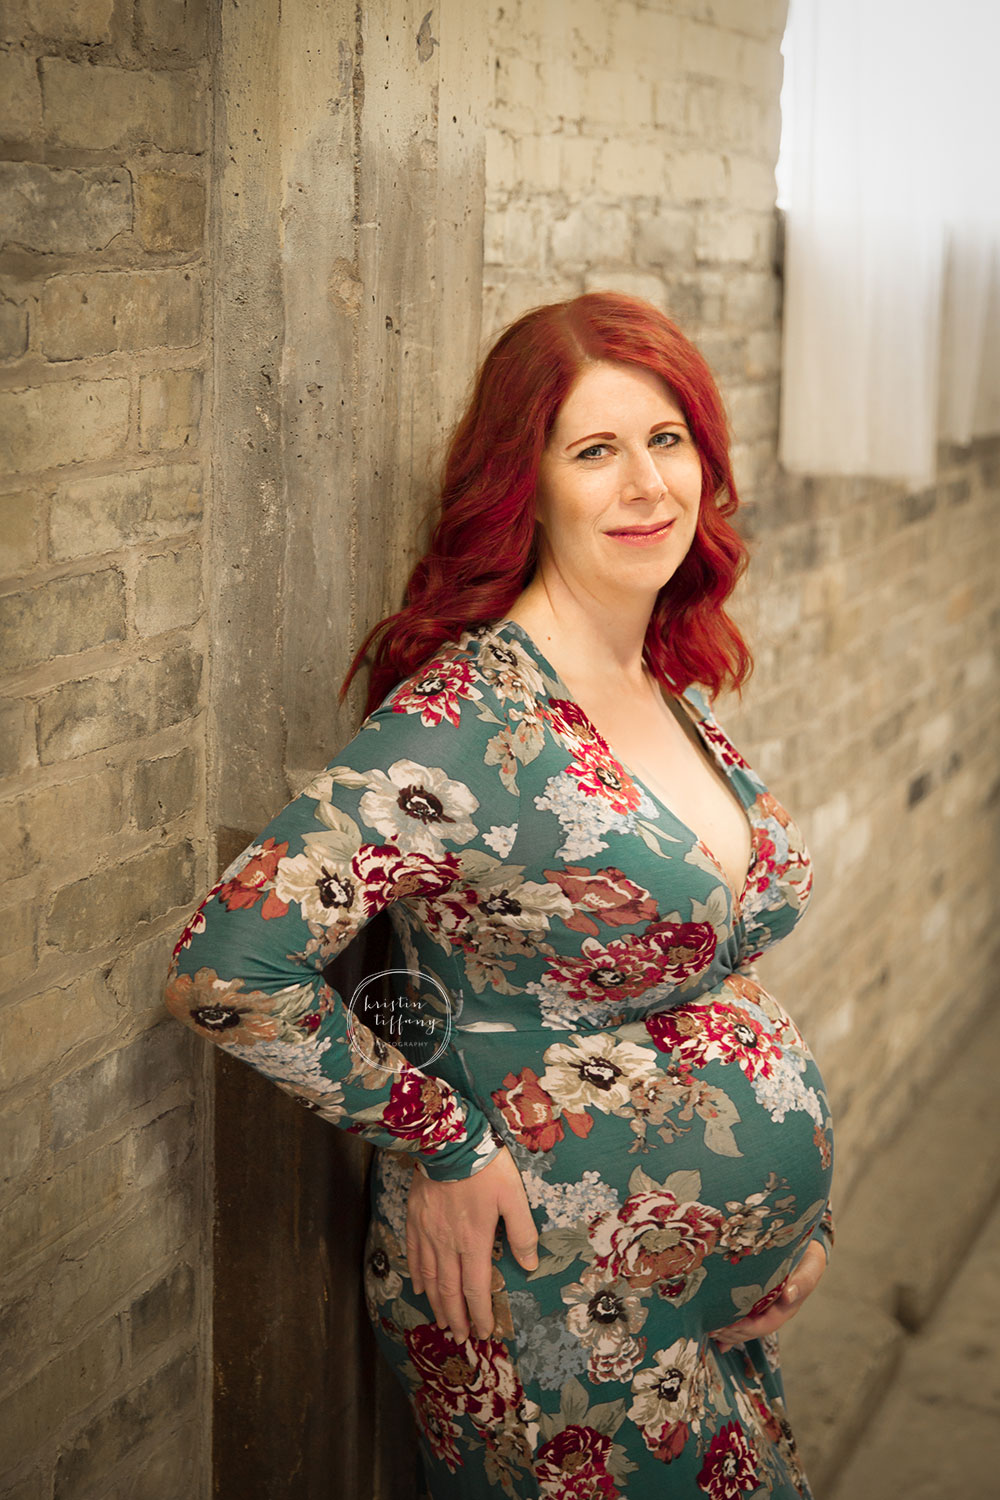 a maternity photo of a woman in a floral dress by a brick wall